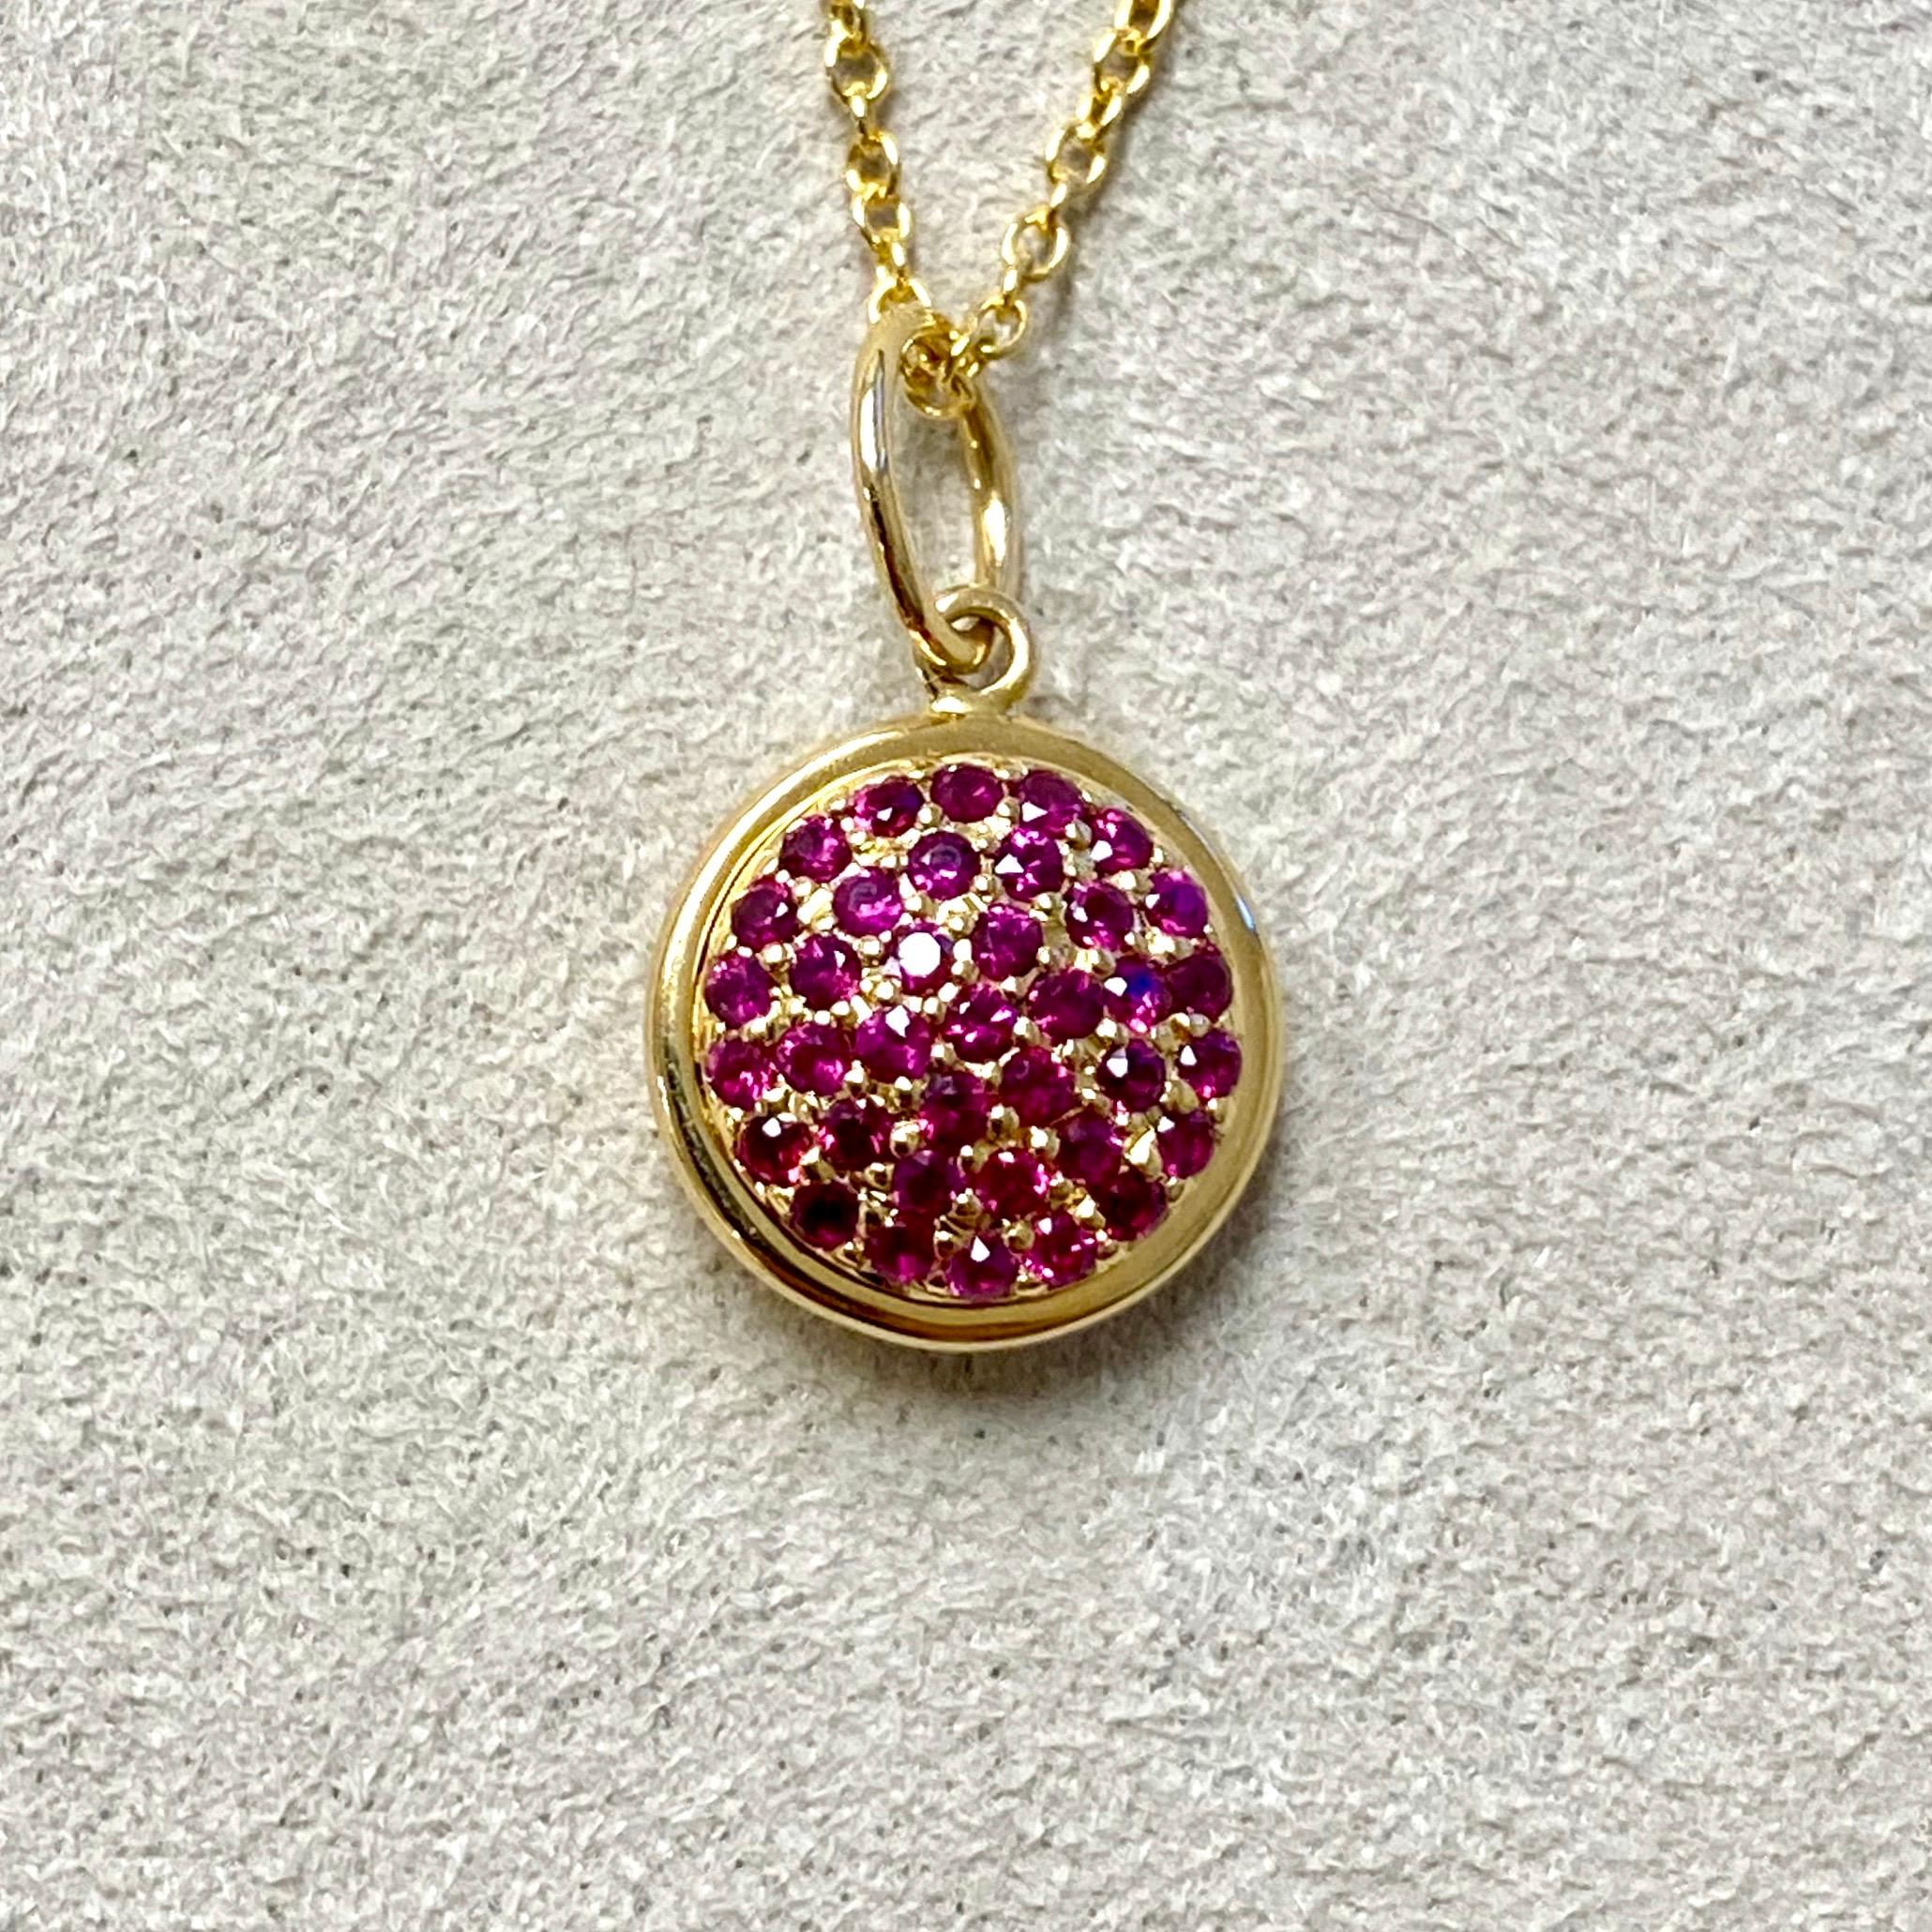 Created in 18 karat yellow gold
Ruby 0.30 ct approx
July birthstone
Chain sold separately

Crafted from 18 karat yellow gold, this pendant features a radiant ruby with an approximate carat weight of 0.30, a perfect pick for July birthdays. Chain